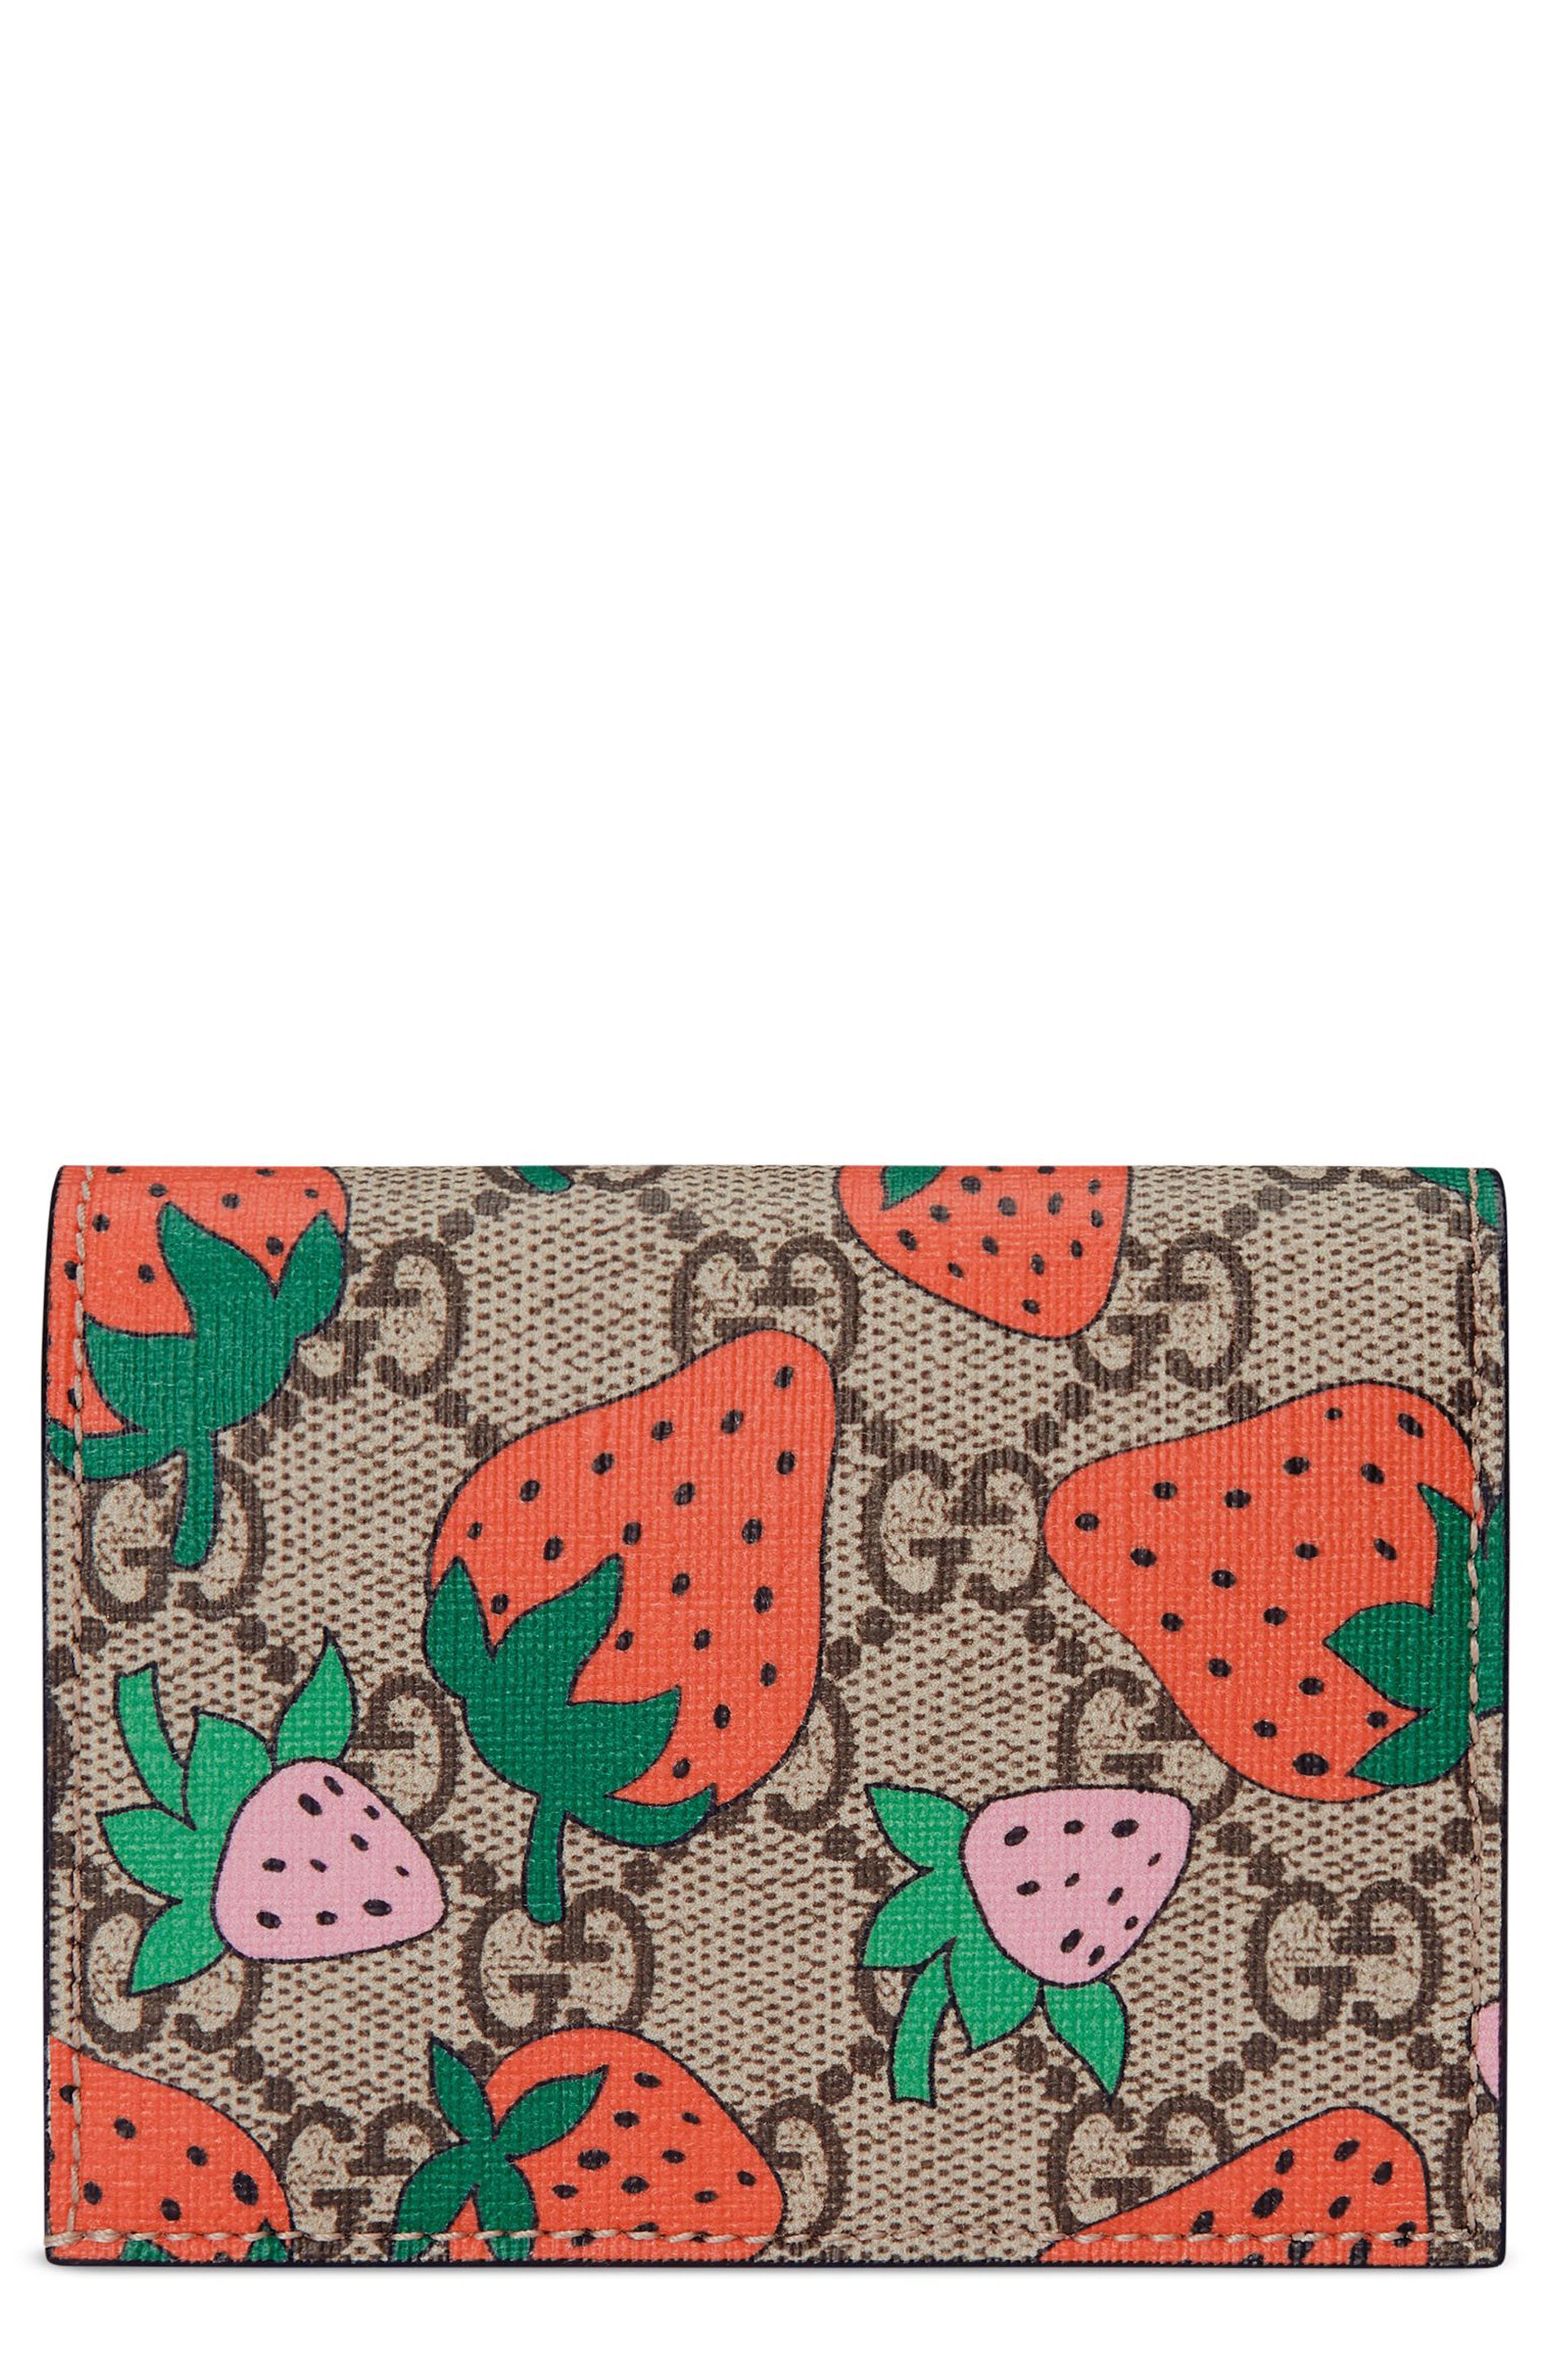 gucci wallet strawberry